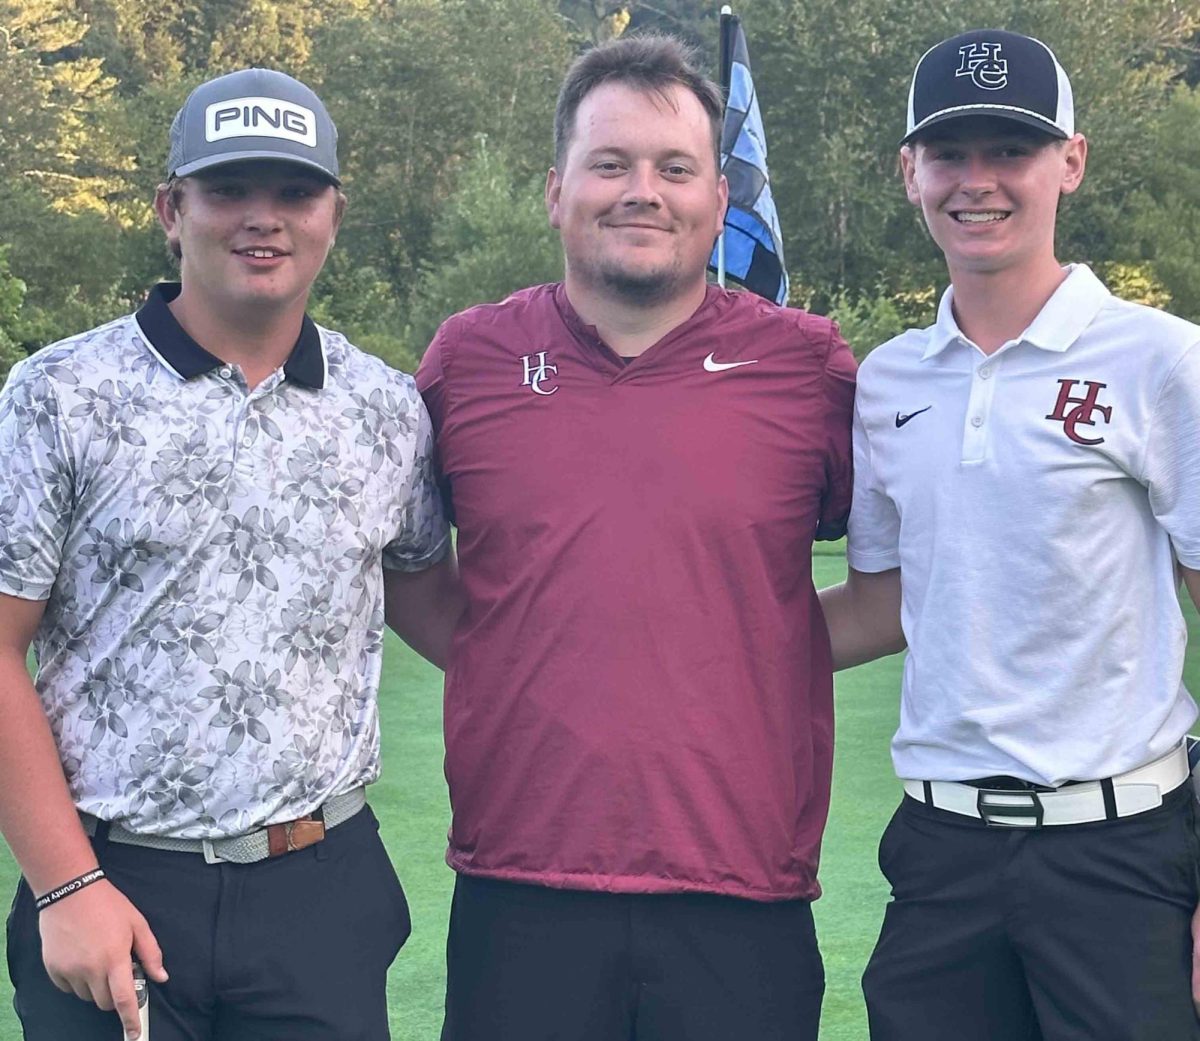 Harlan+County+High+School+golfers+Brayden+Casolari+%28left%29+and+Cole+Cornett+%28right%29+took+the+top+two+spots+in+a+Pine+Mountain+Golf+Conference+tournament+on+Thursday+in+Middlesboro.